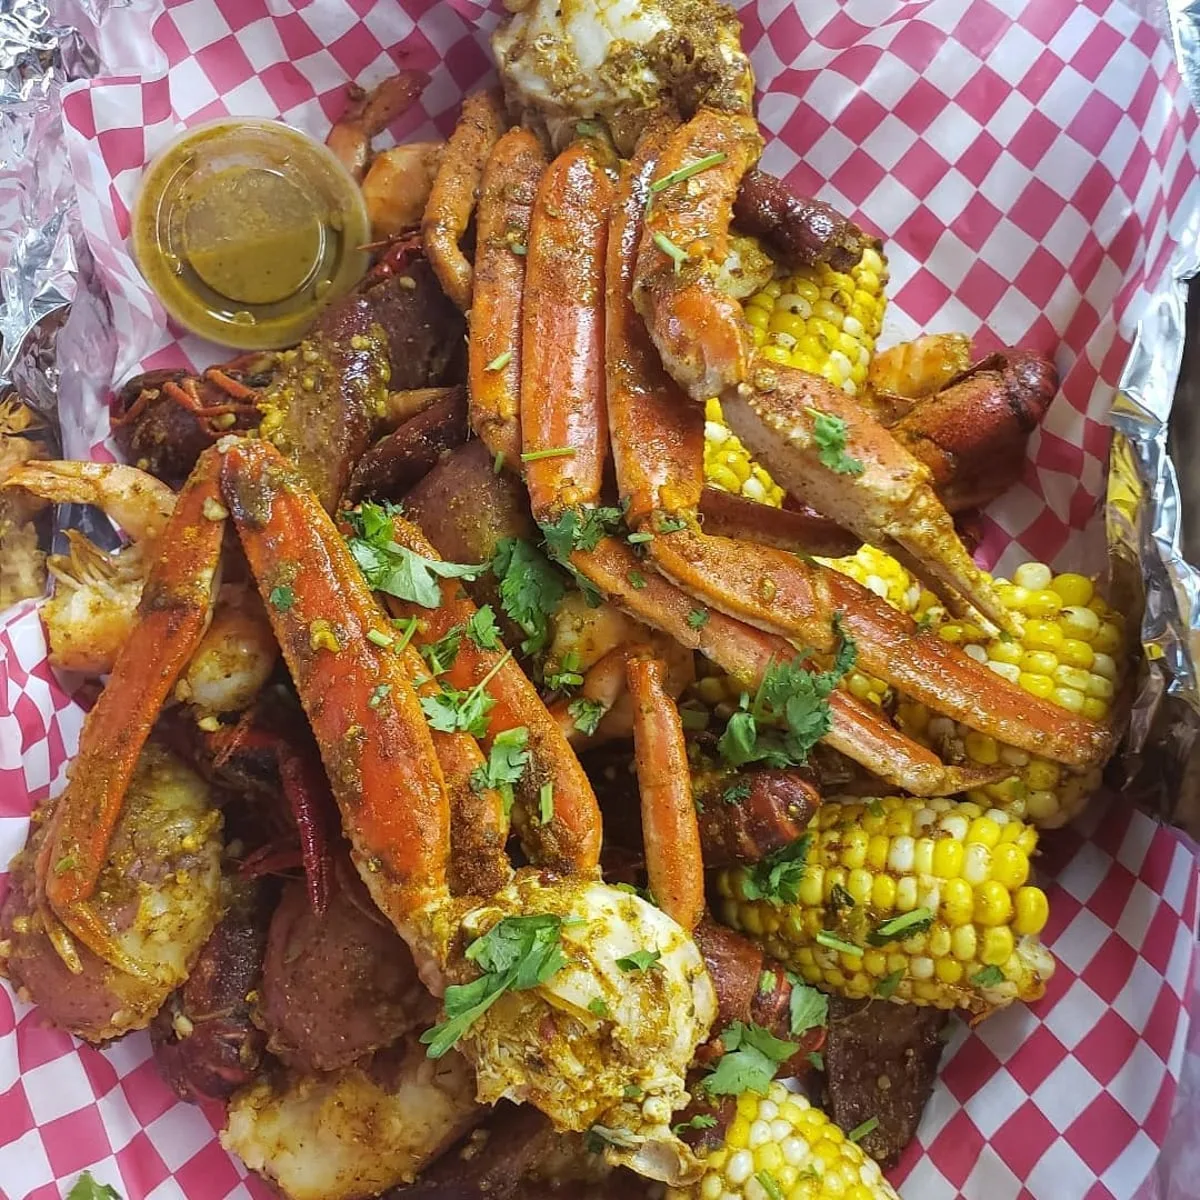 Seafood platter from Caribbean grill food truck in johnson city tn 